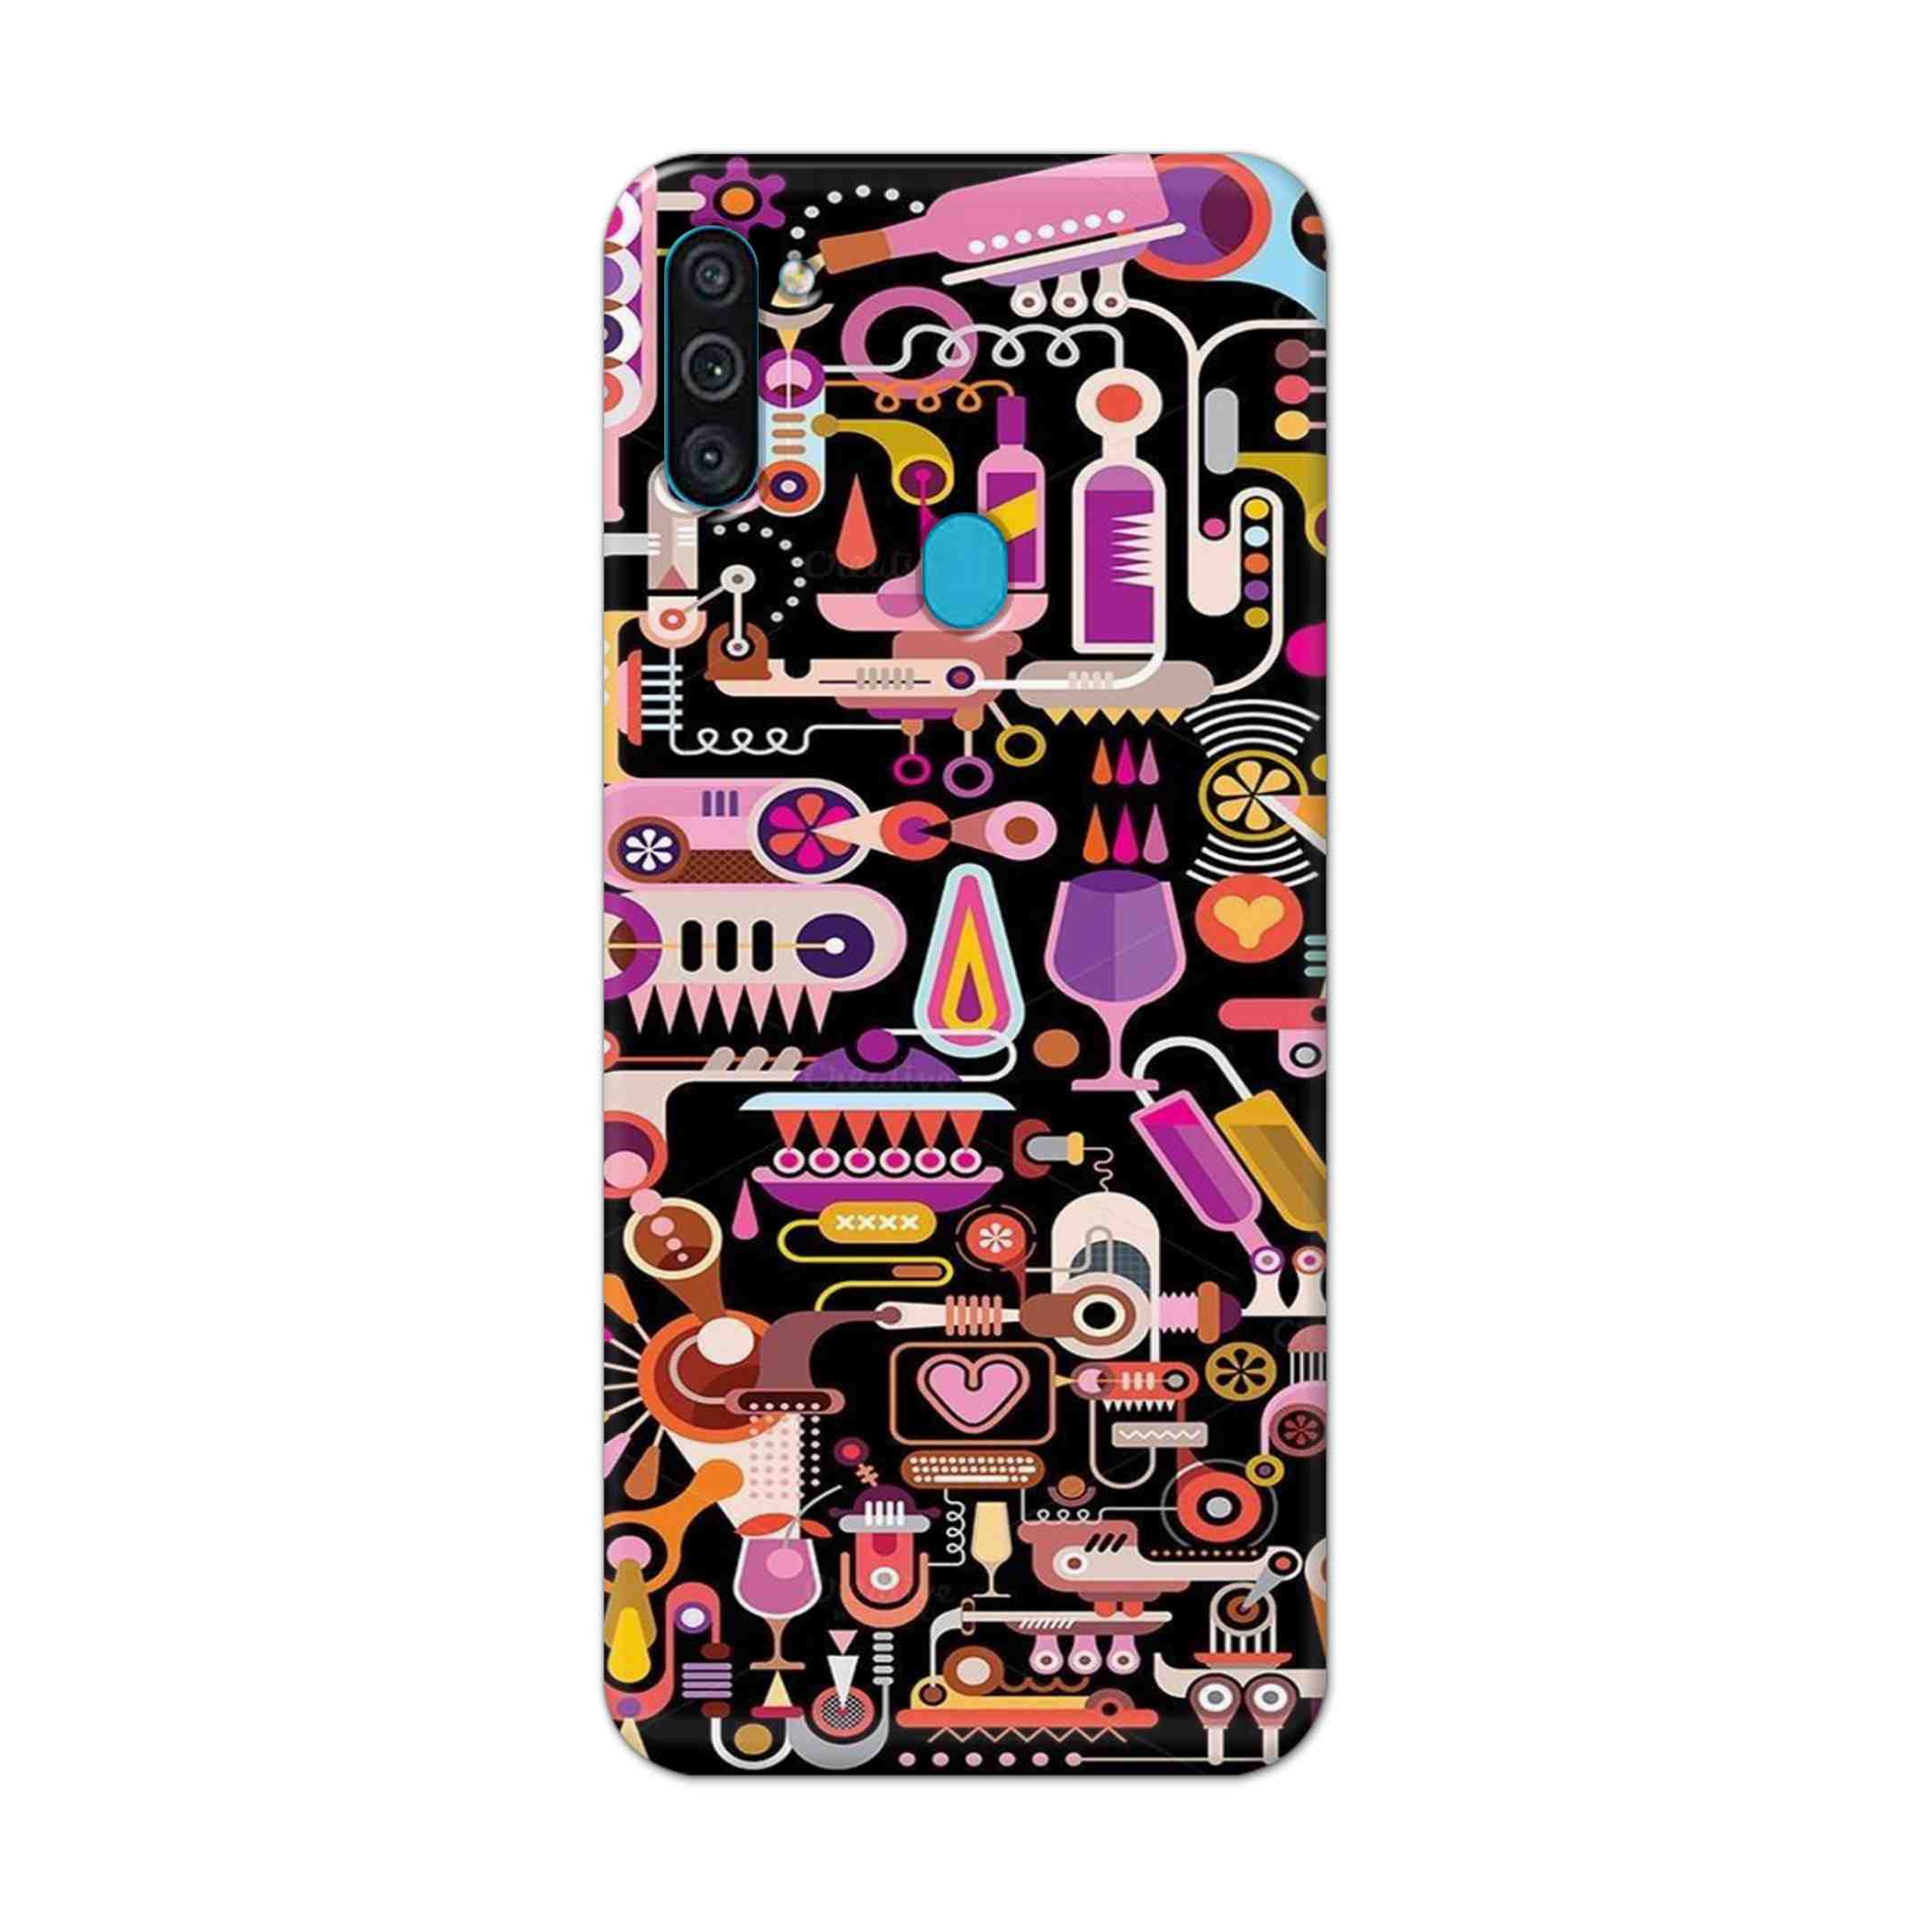 Buy Lab Art Hard Back Mobile Phone Case Cover For Samsung Galaxy M11 Online